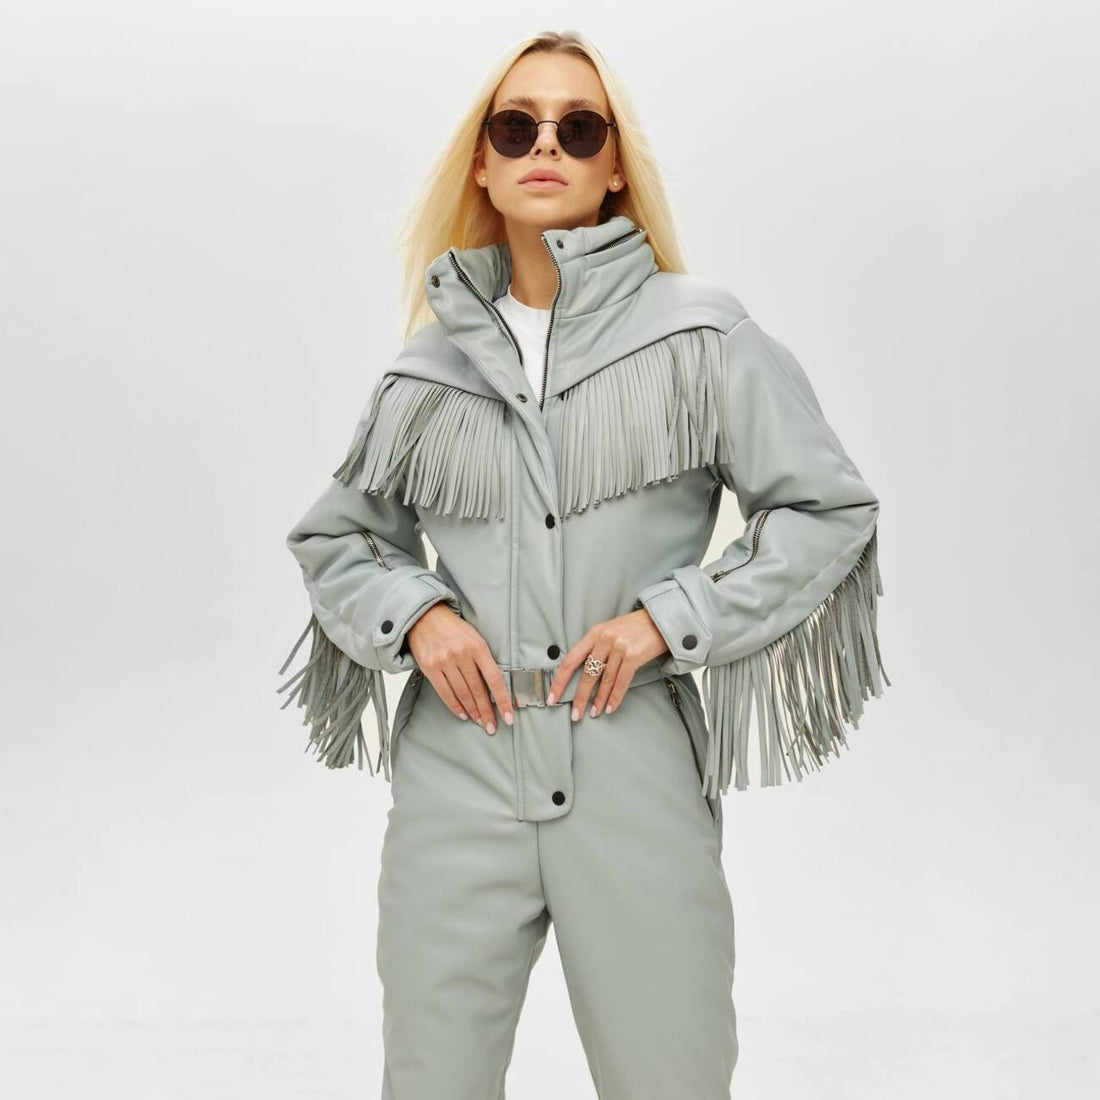 Ski suit with tassles - BONA - GRAY - Weatern snowsuit for winter outfit ski vacation